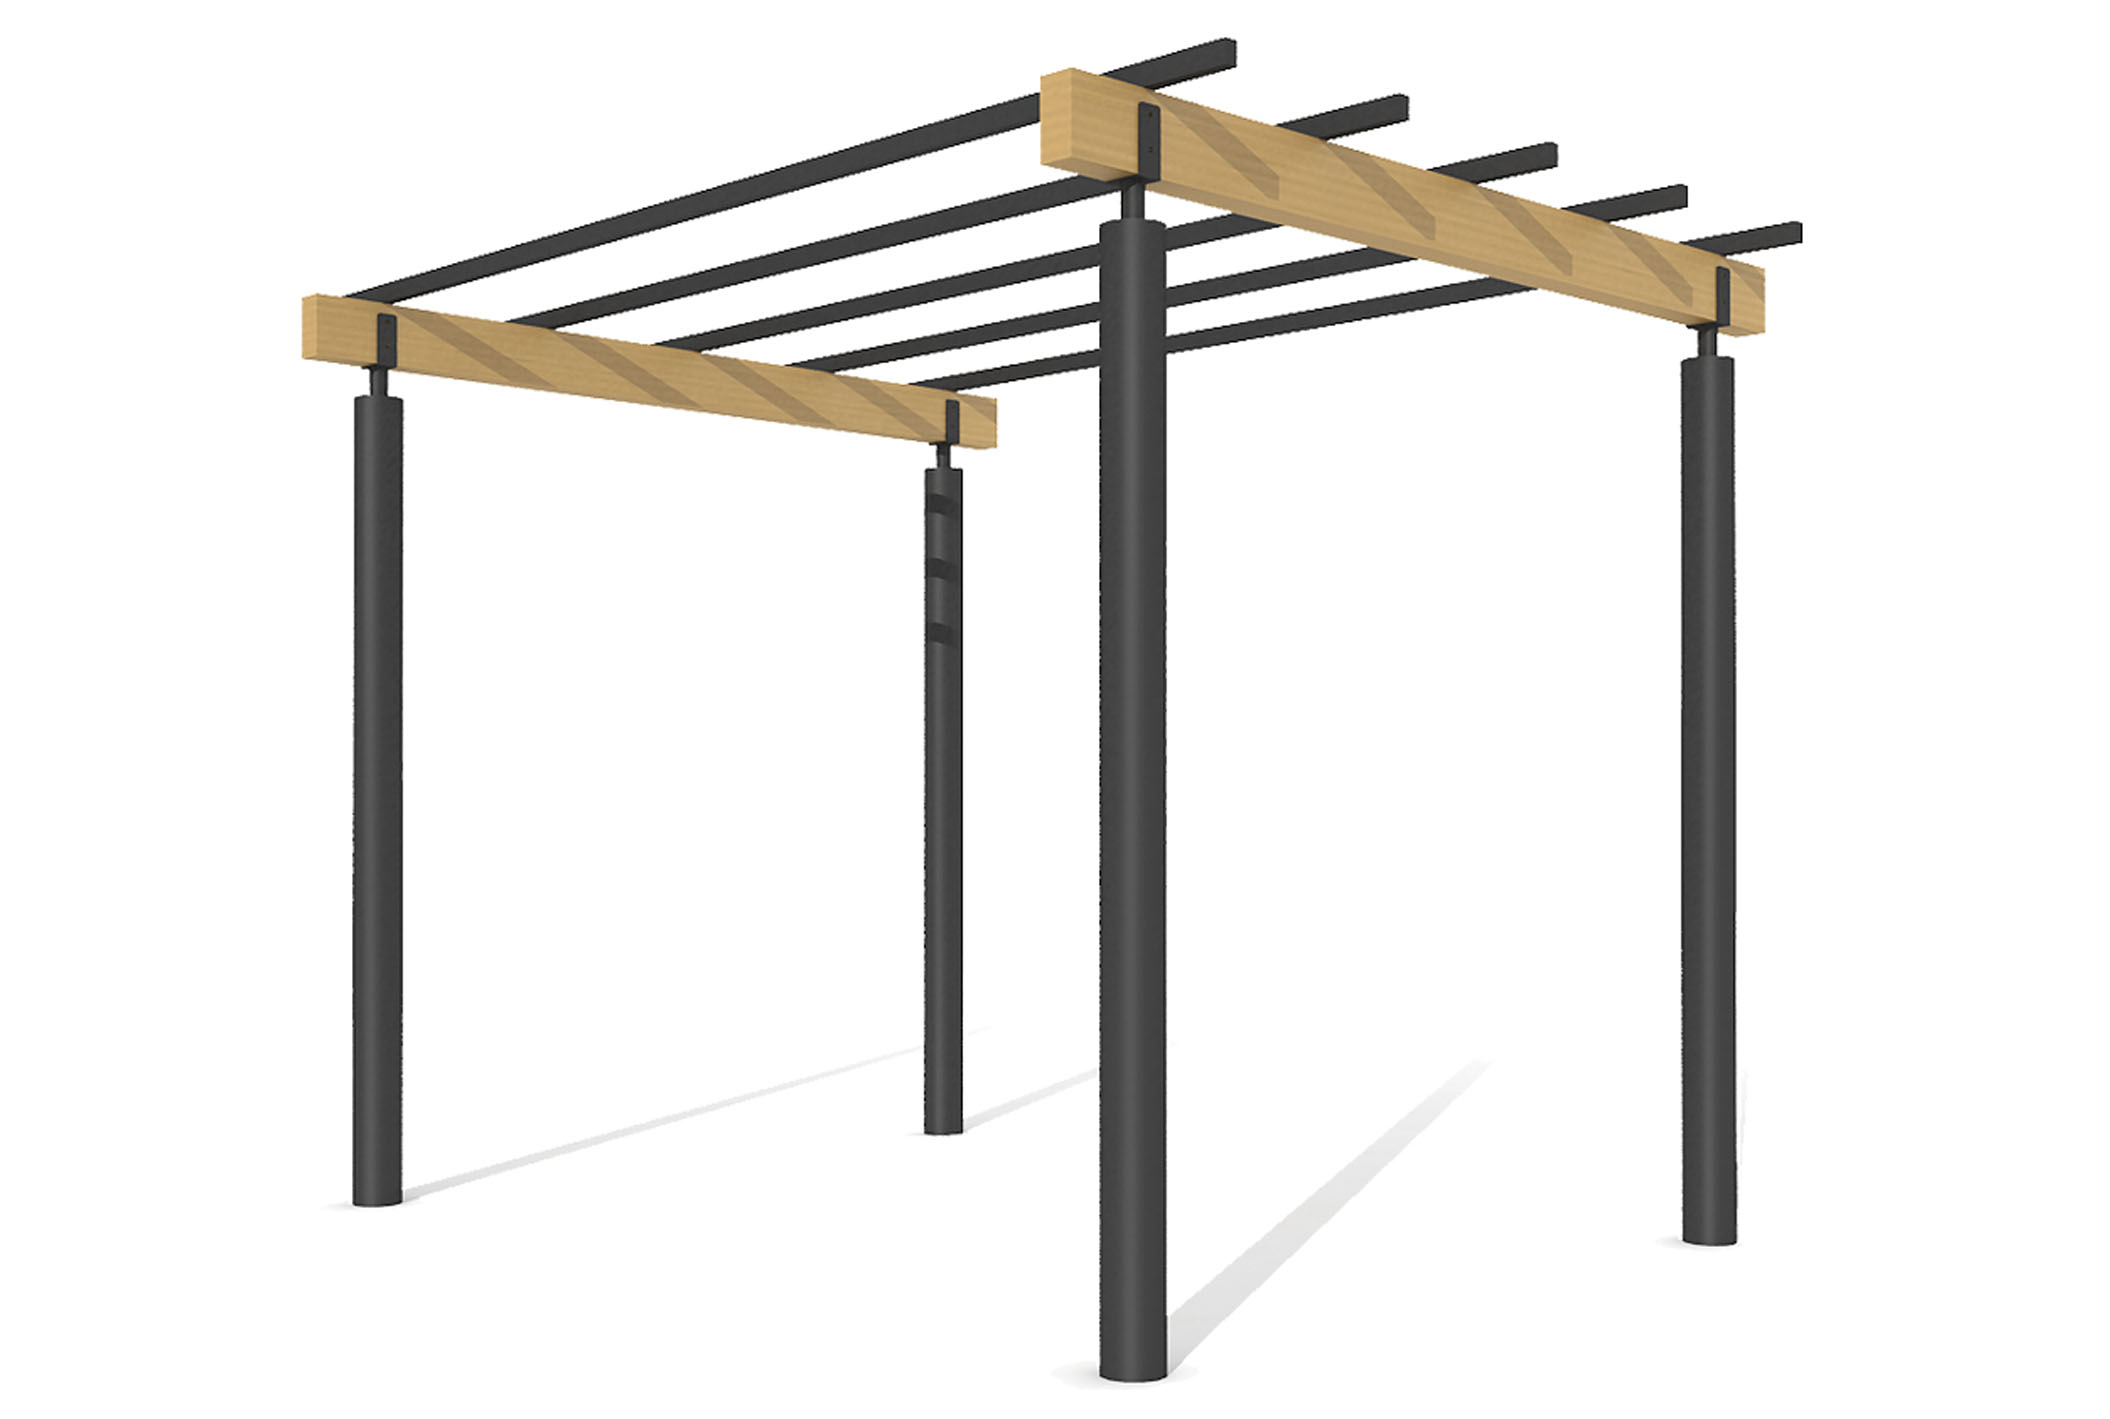 Pergola of wood and steel for outdoors